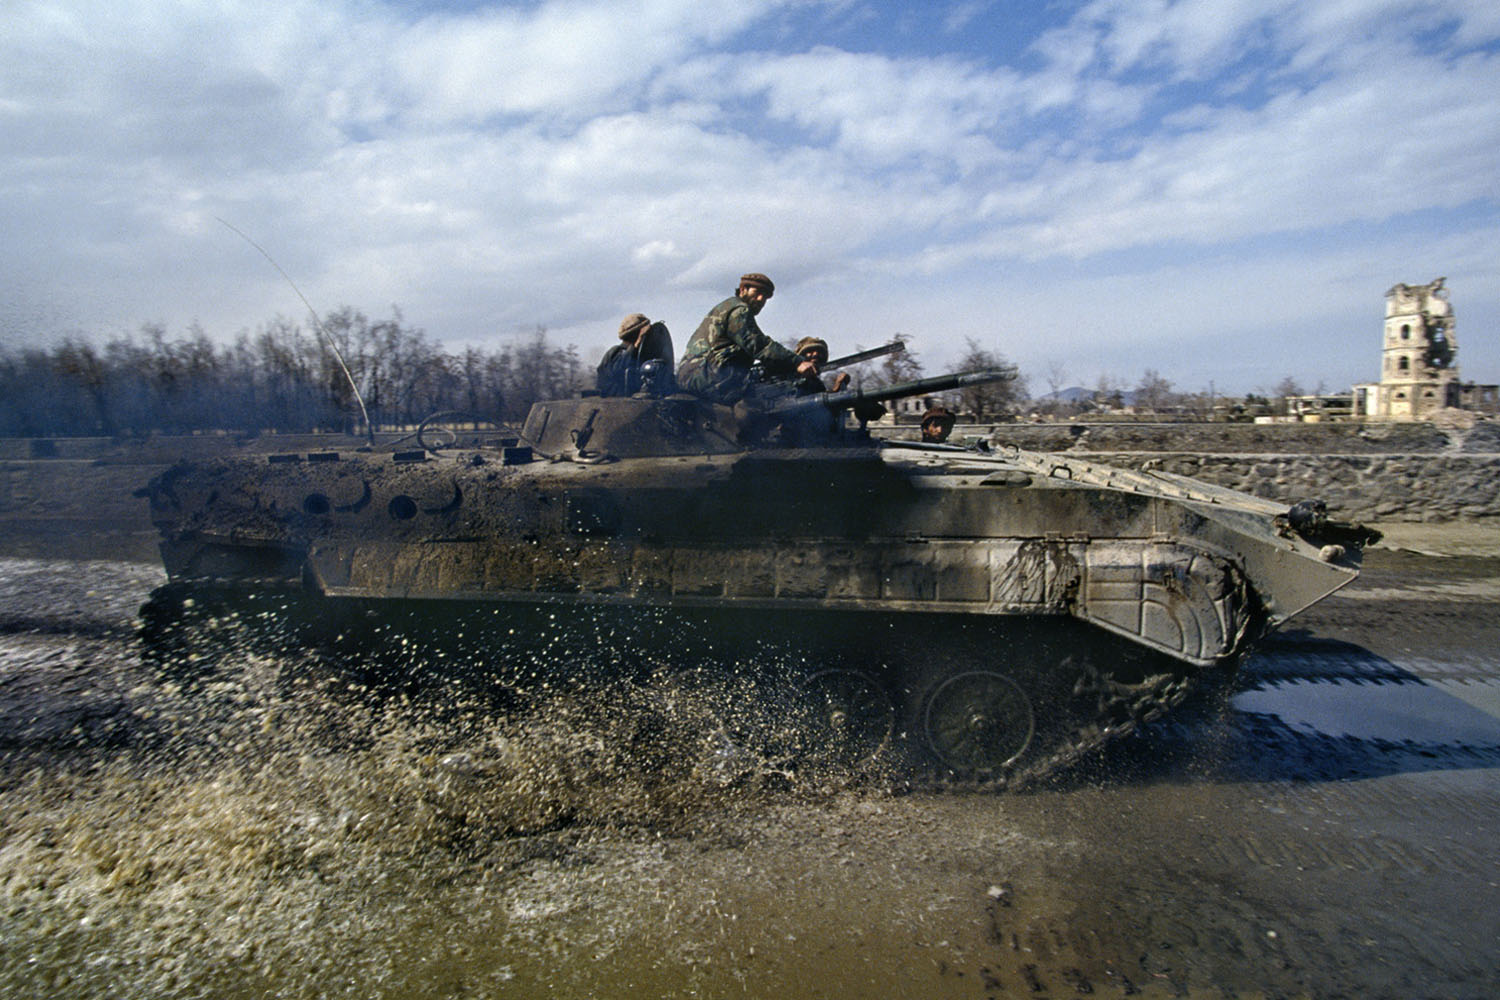 Soldiers loyal to President Burhanuddin Rabbani ride along the Kabul River in a BMP-1, a Russian-built armored vehicle. March, 1994